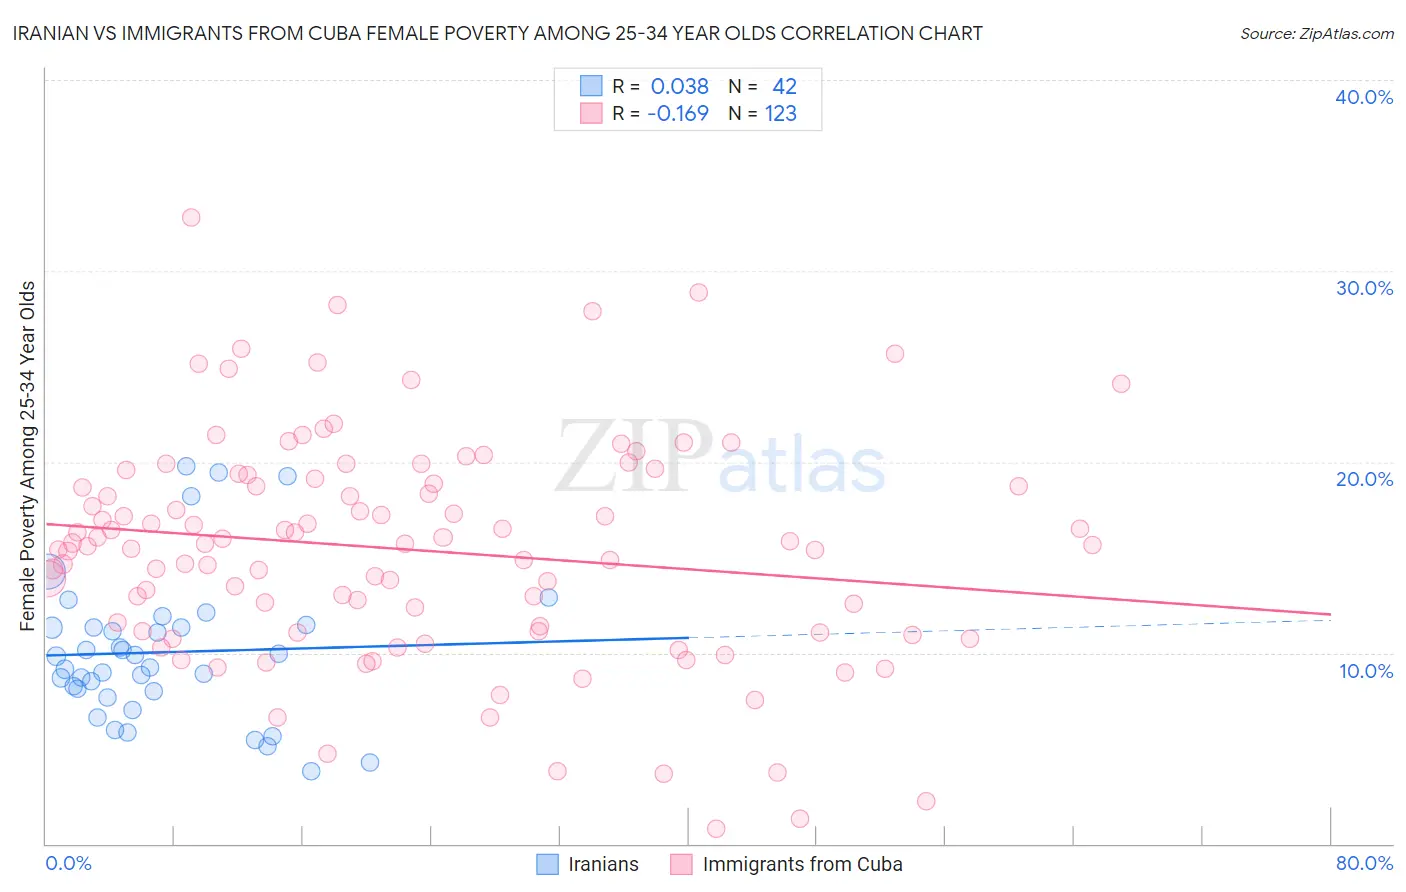 Iranian vs Immigrants from Cuba Female Poverty Among 25-34 Year Olds